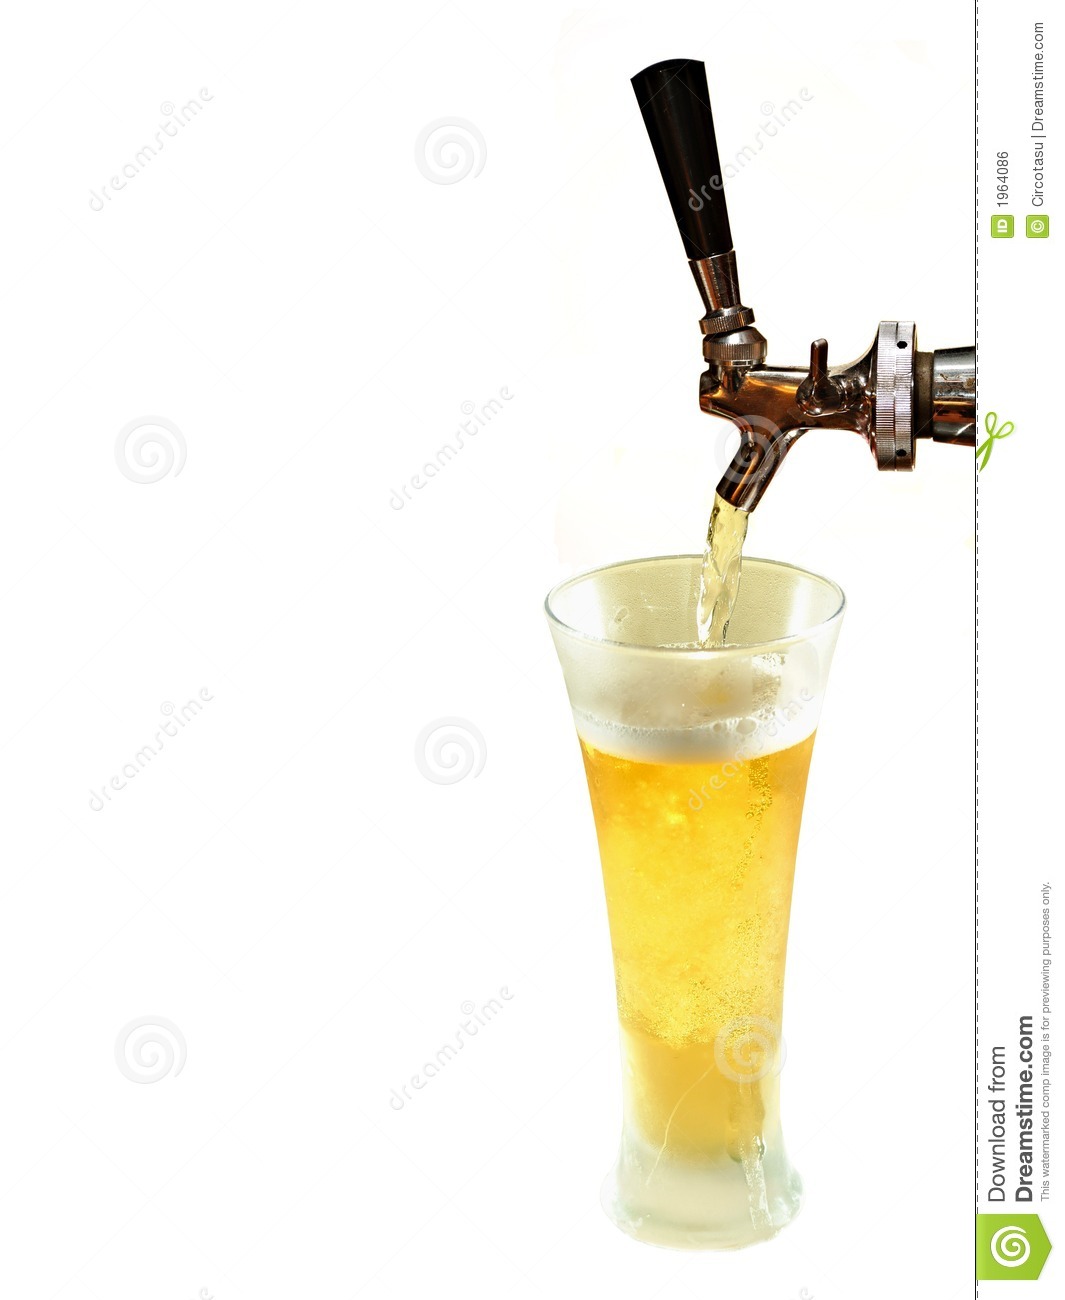 Beer Draft And Frozen Glass Royalty Free Stock Image   Image  1964086